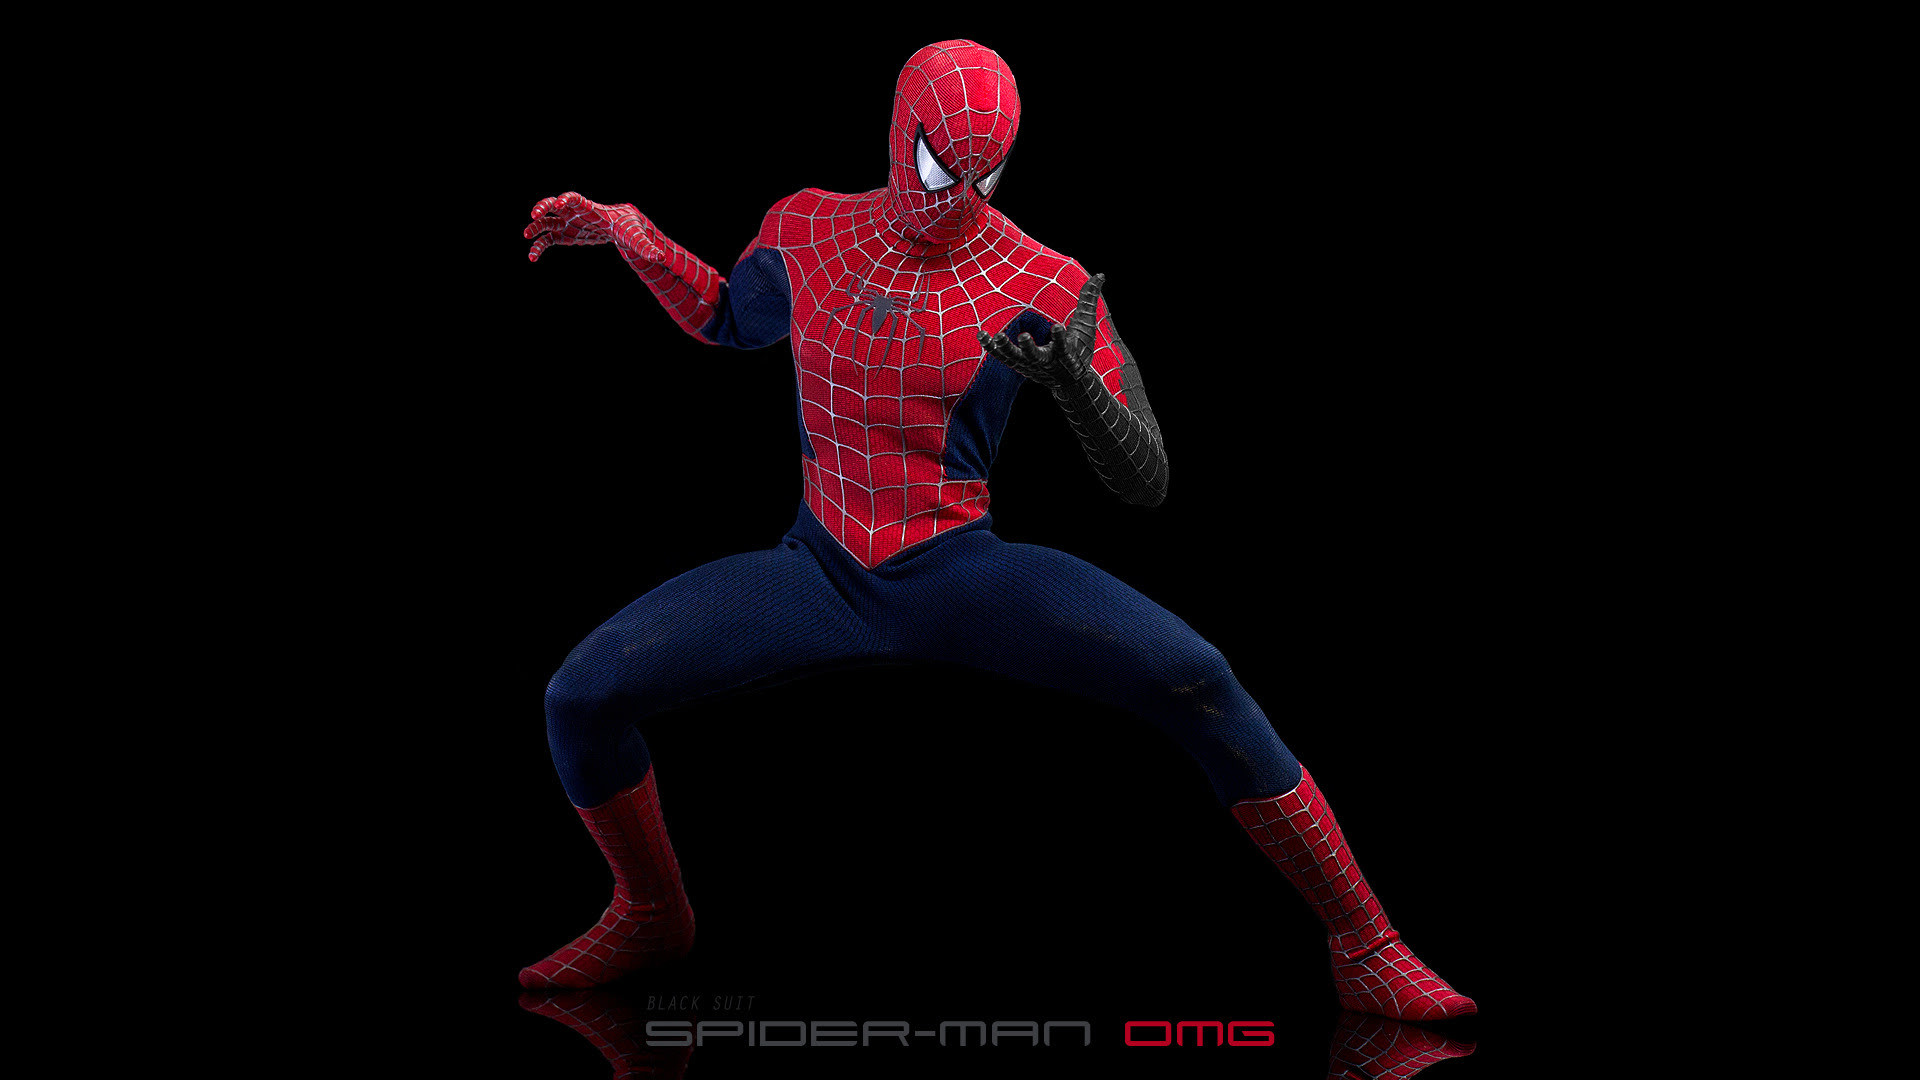 1920x1080 Thread: OMG's photo review Hot Toys Black-suit Spider-man